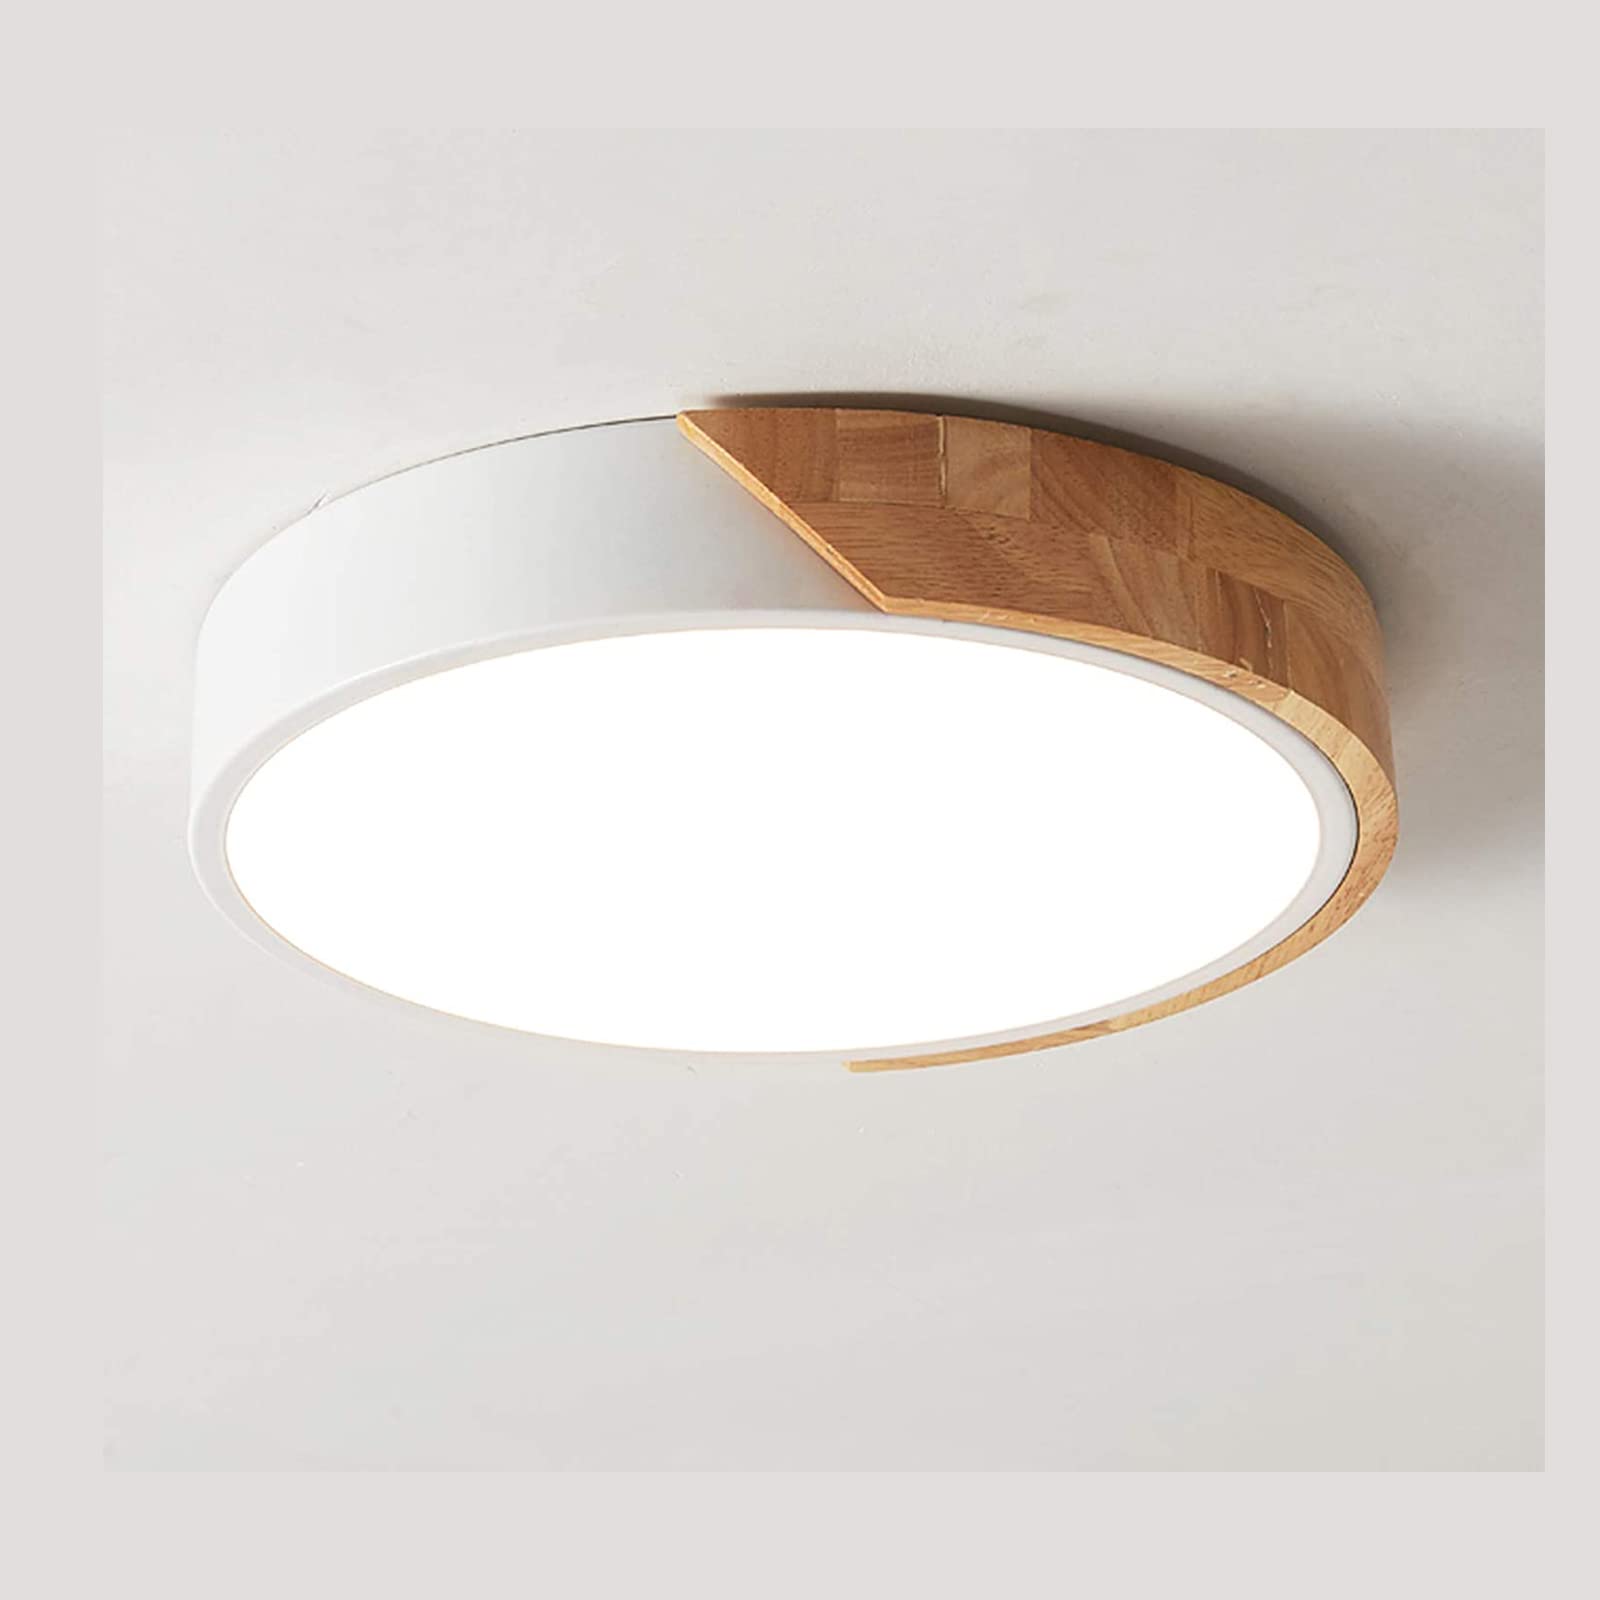 WDENI Ceiling Lights Dimmable Modern Wood Flush Mount Ceiling Light, Light Fitting Ceiling for Living Room Bedroom Kitchen Lounge Hallway, 15.7Inch,36W